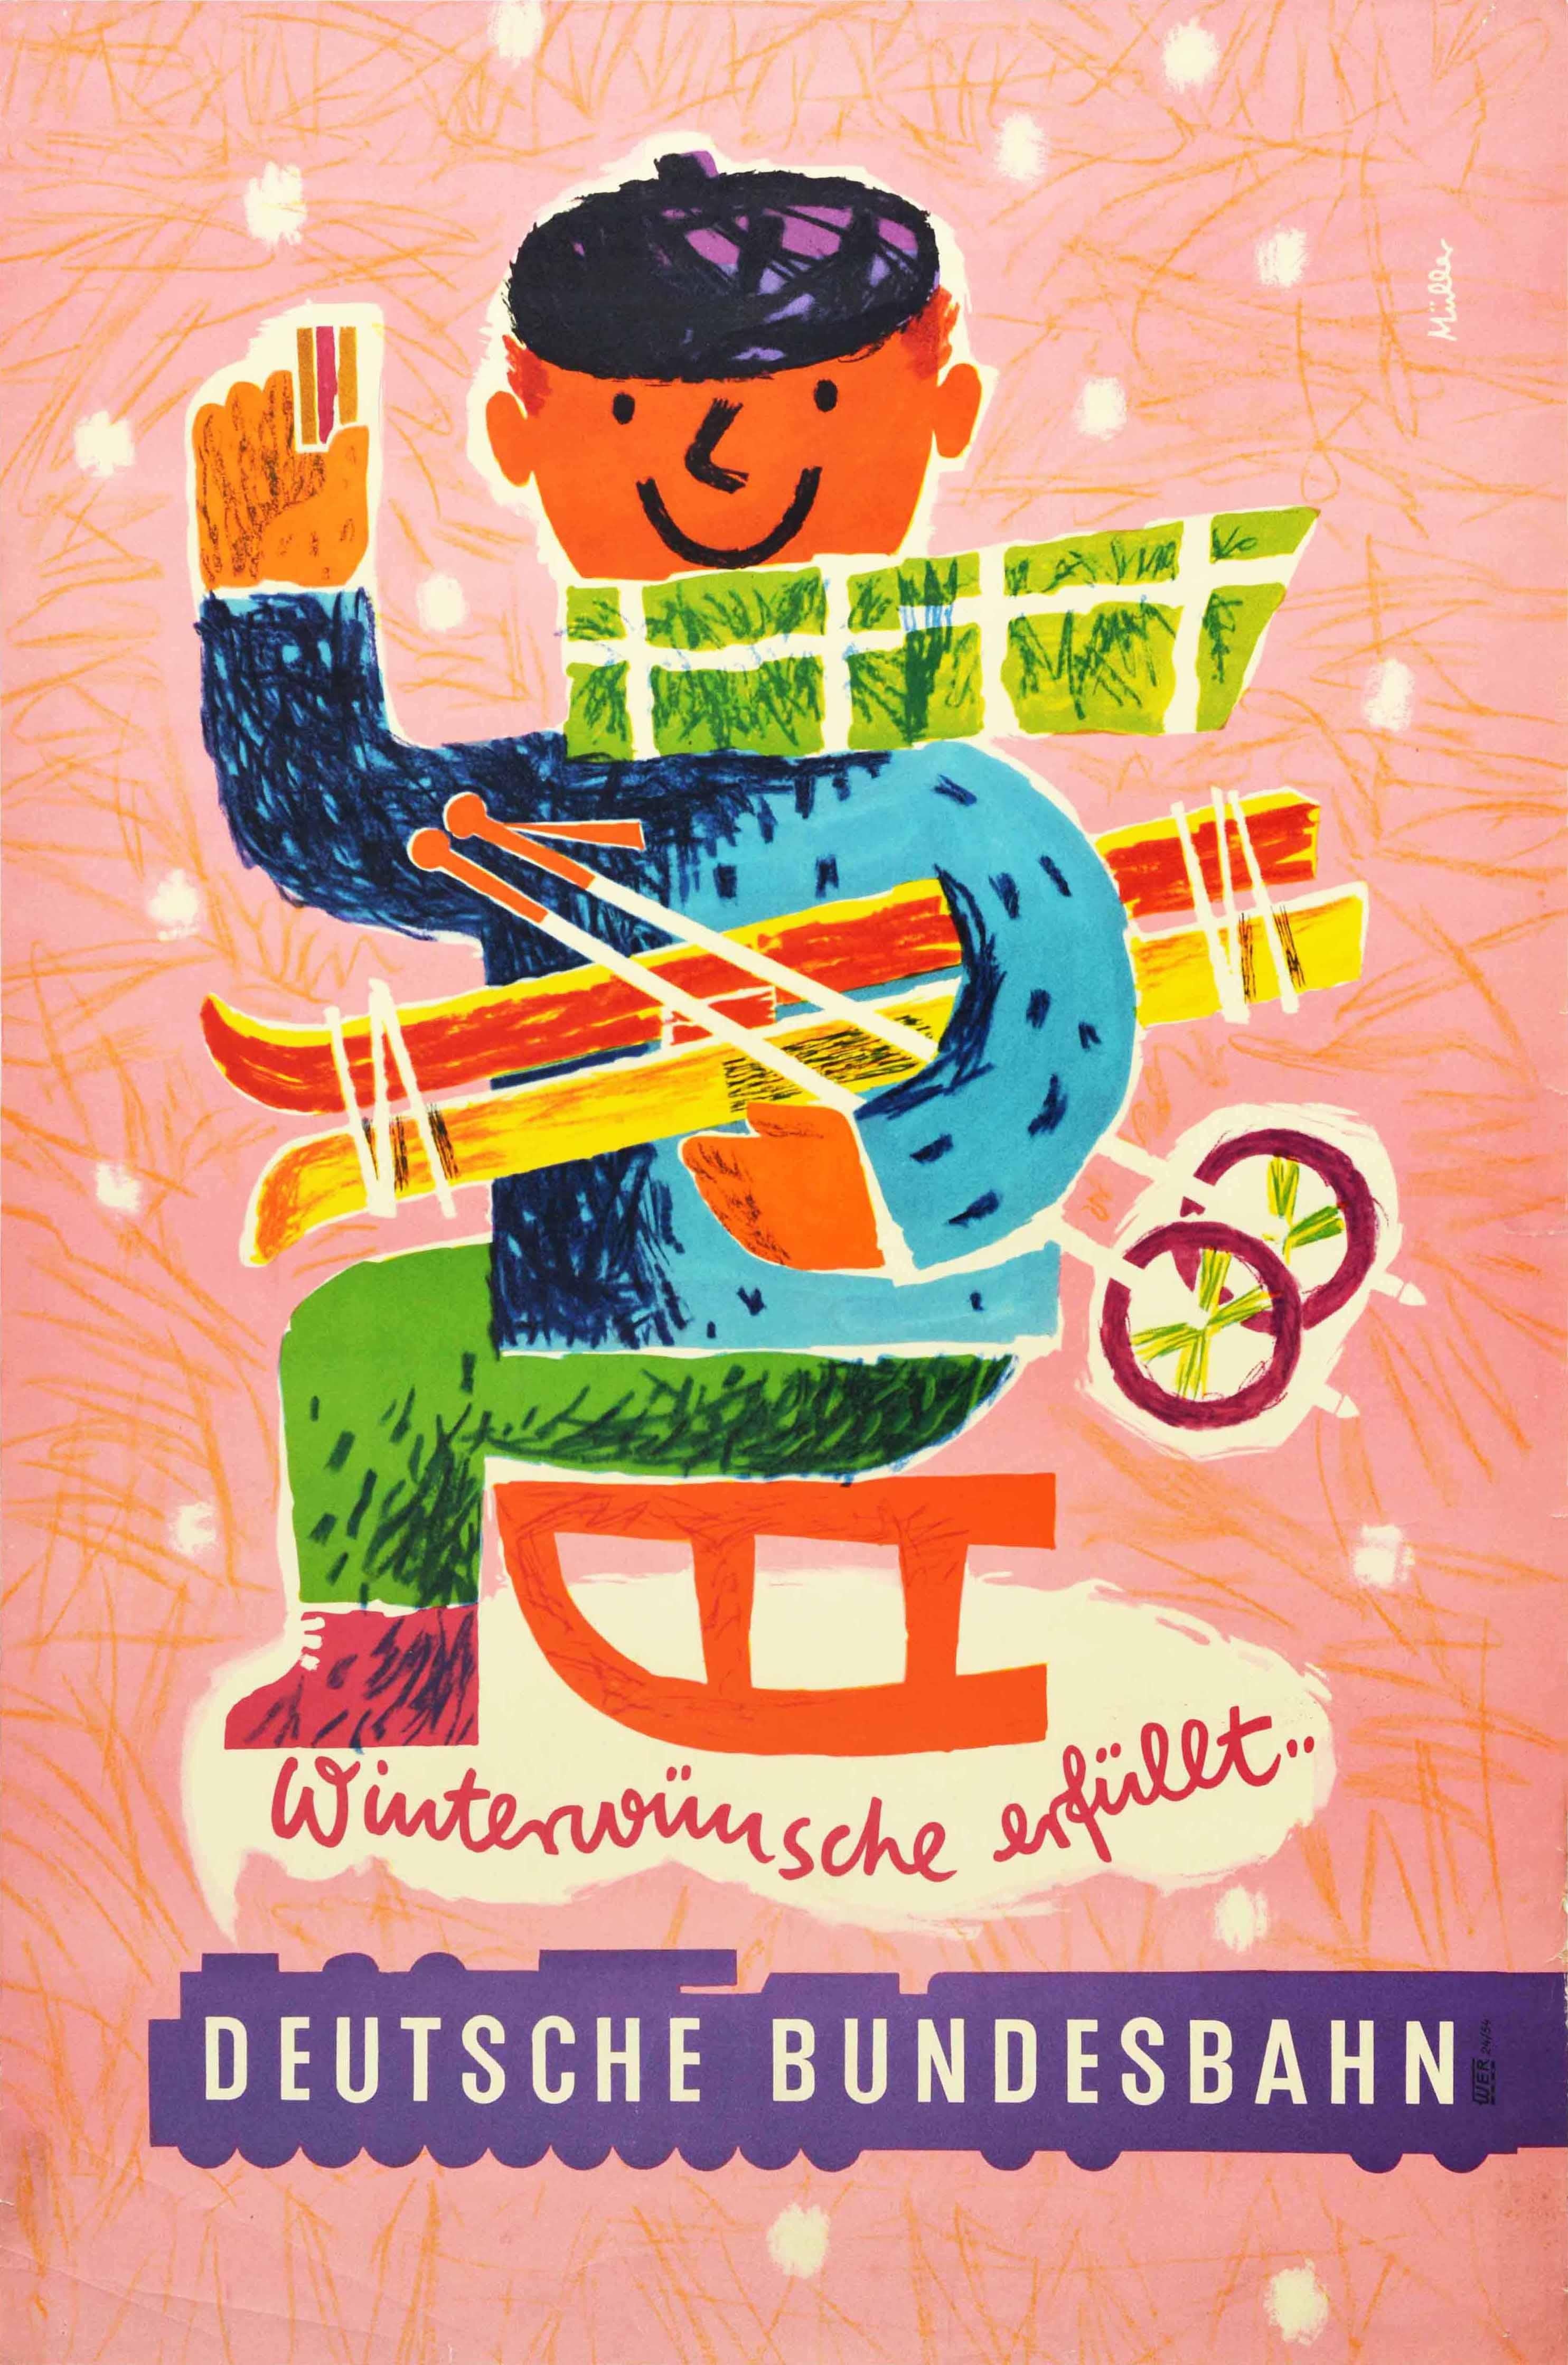 Original vintage winter travel poster issued by DB Deutsche Bundesbahn featuring a colourful and fun illustration of a smiling man in a blue jumper, green trousers, scarf and a purple hat holding skis and poles under one arm and a showing the viewer